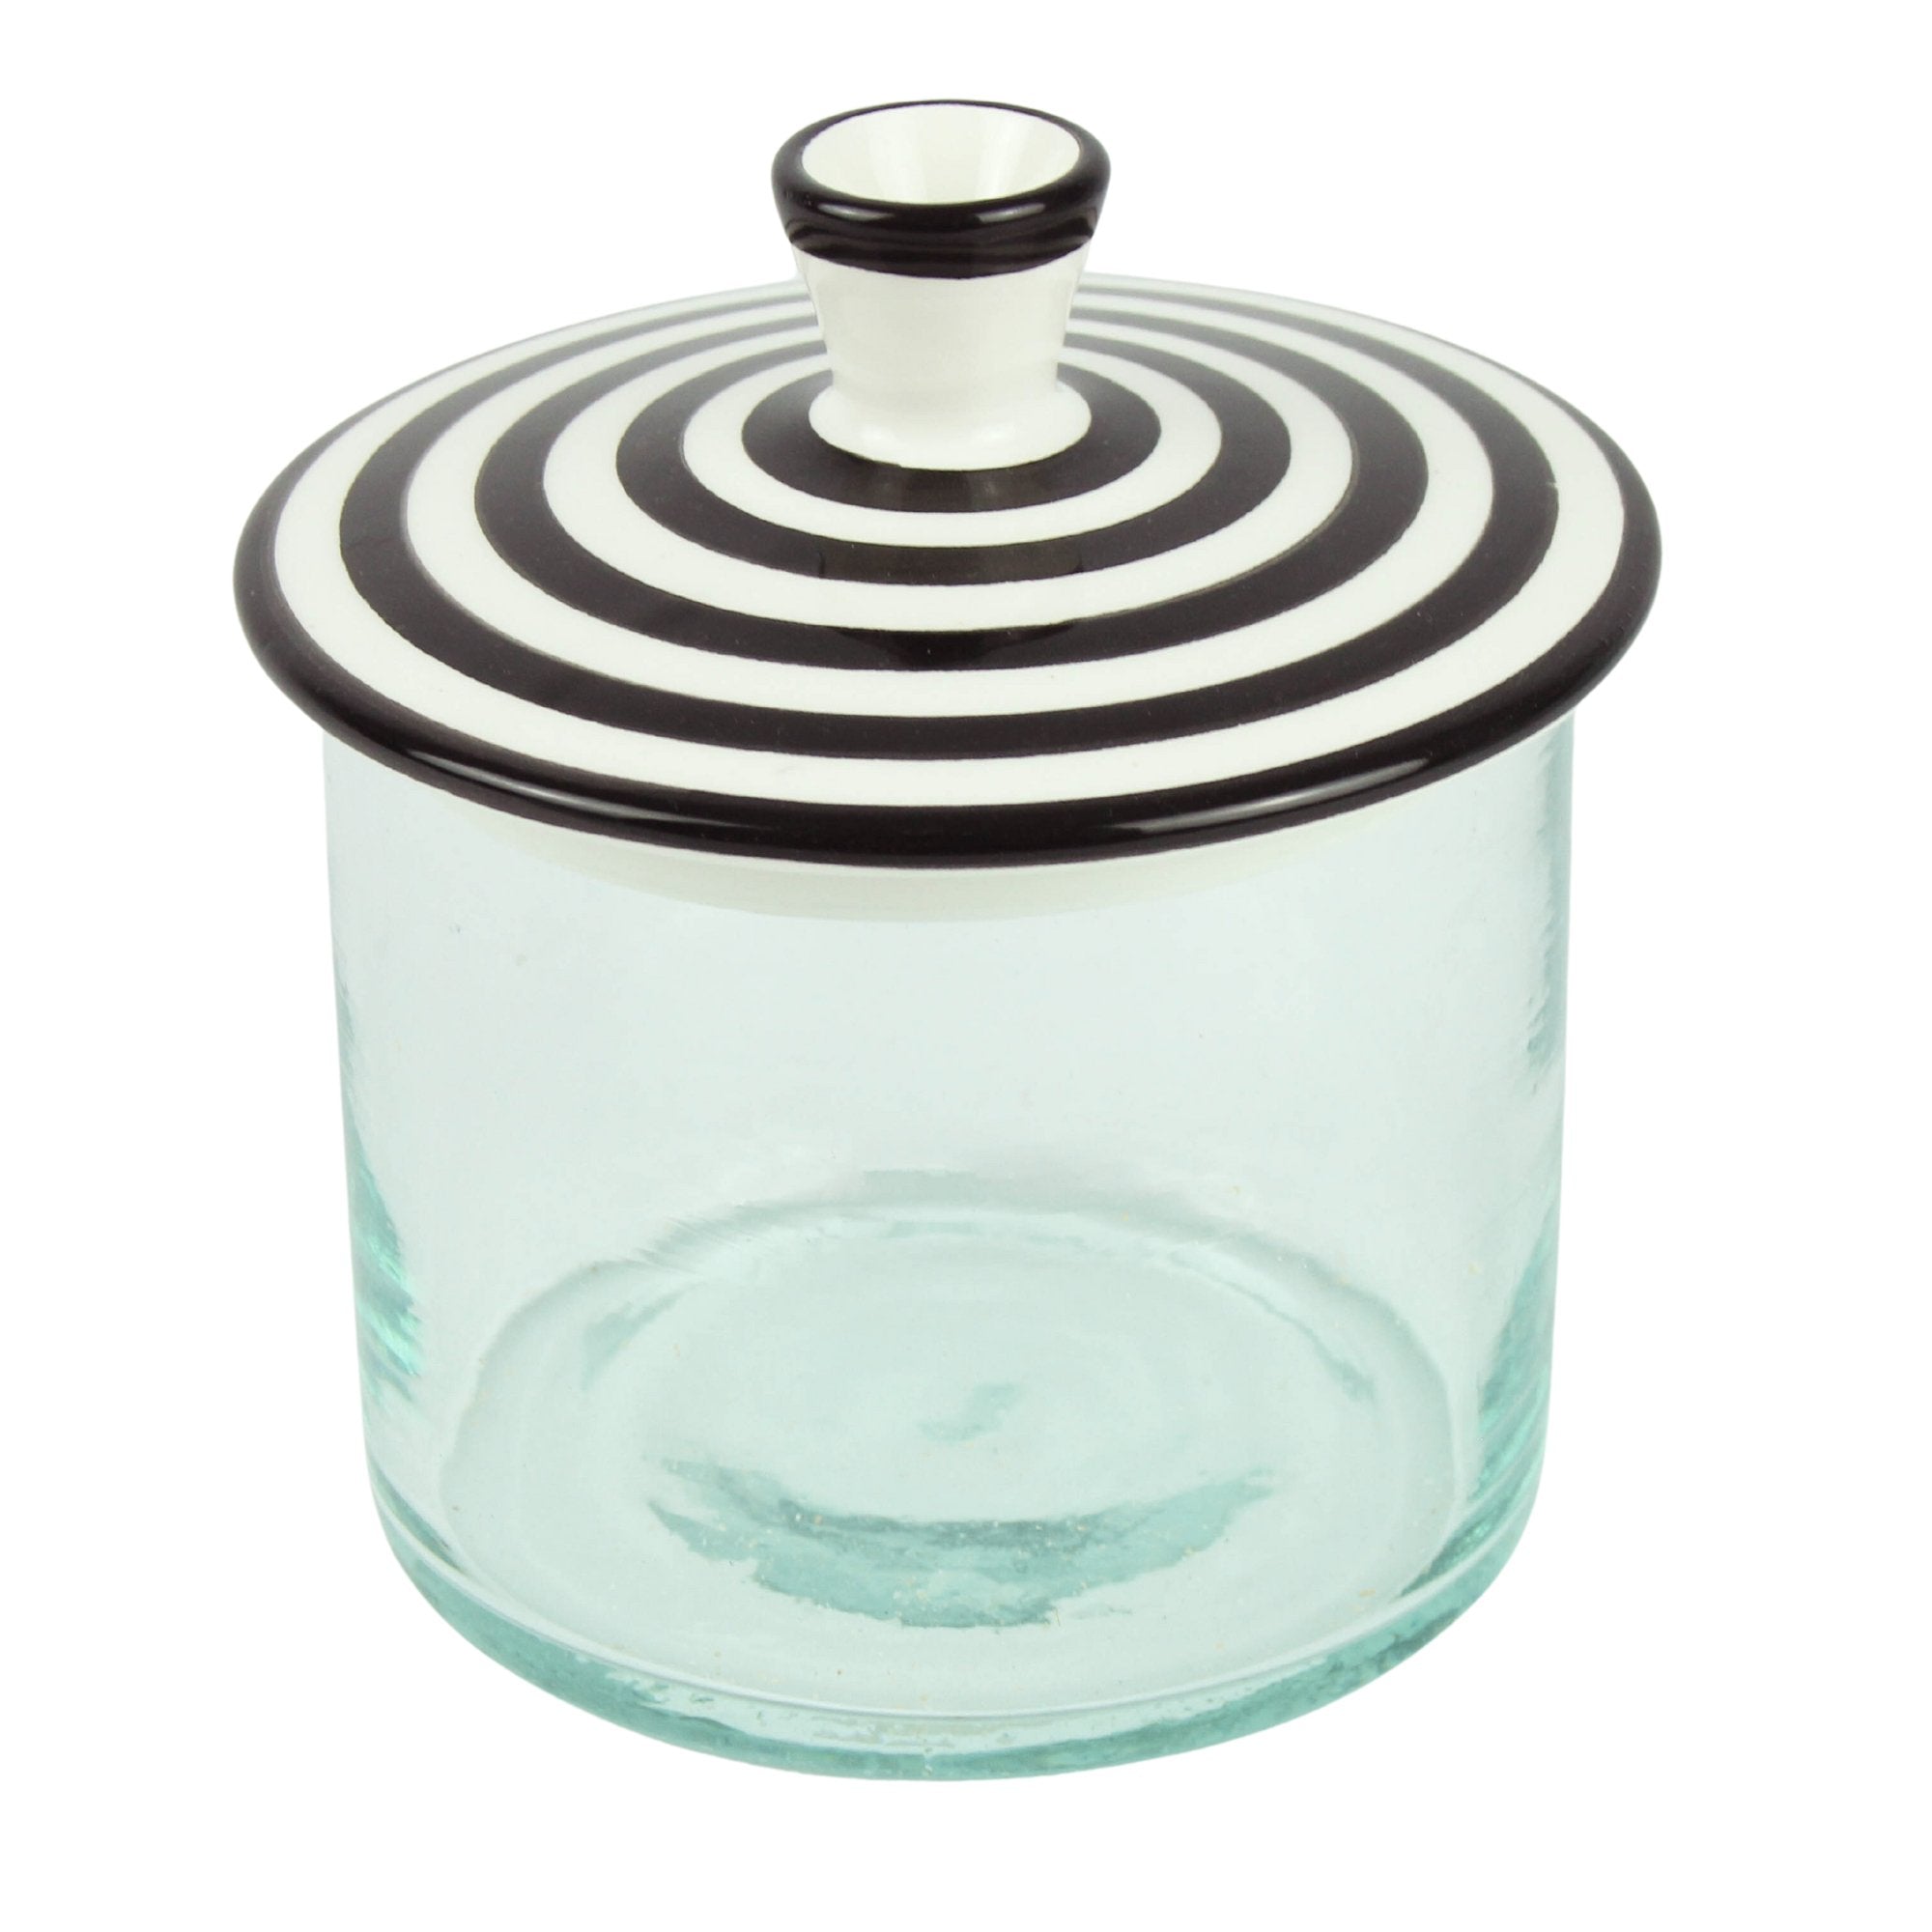 Glass Jar with Patterned Ceramic Lid - Artisan Stories